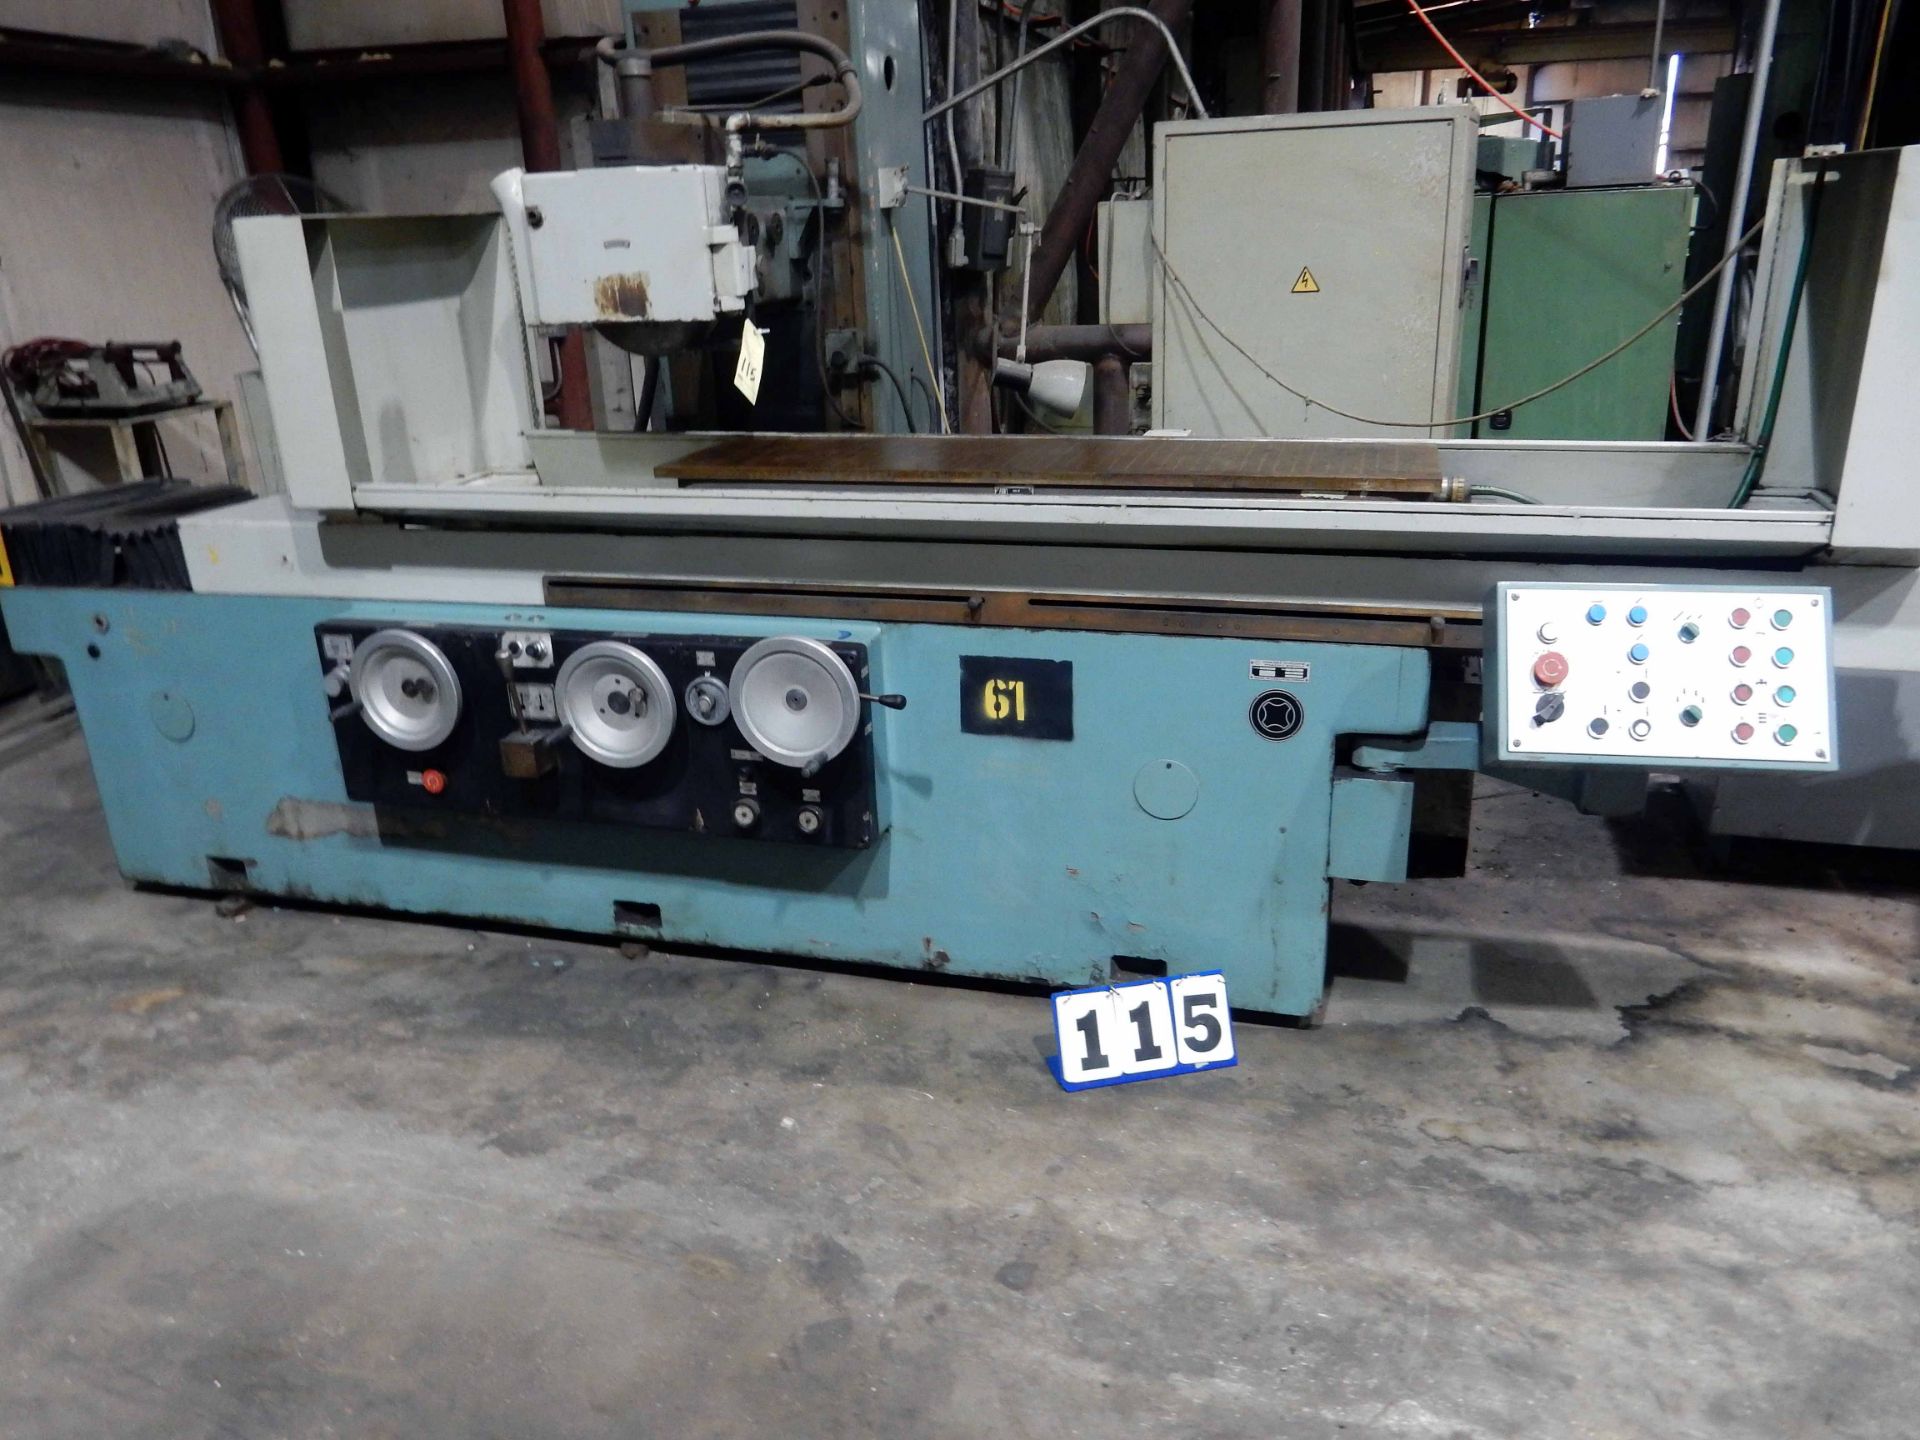 SURFACE GRINDER, TOS MDL. BRH-40B, 15" x 58" magnetic chuck, Machine No. 600-905 (Location H)